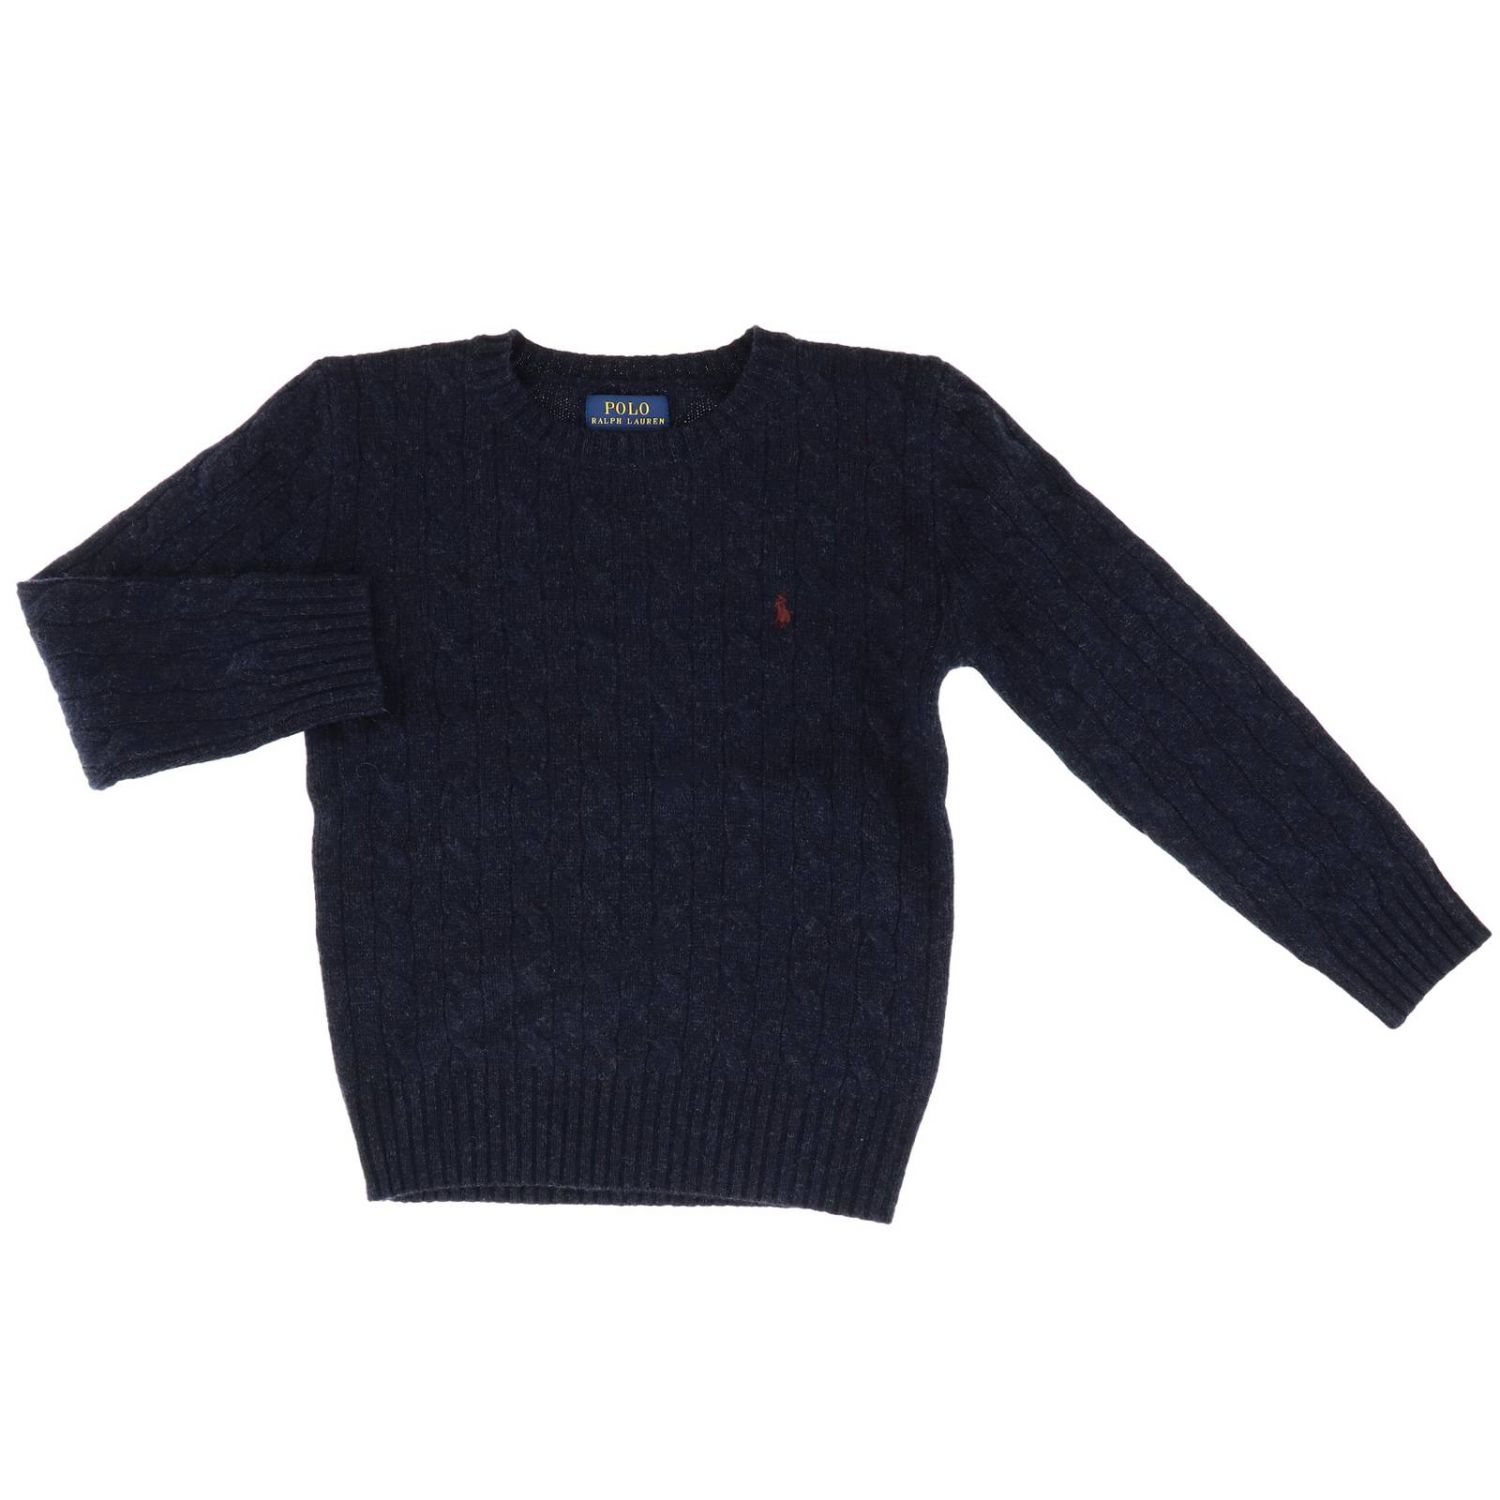 Polo Ralph Lauren Kid Outlet: sweater for boys - Blue | Polo Ralph ...